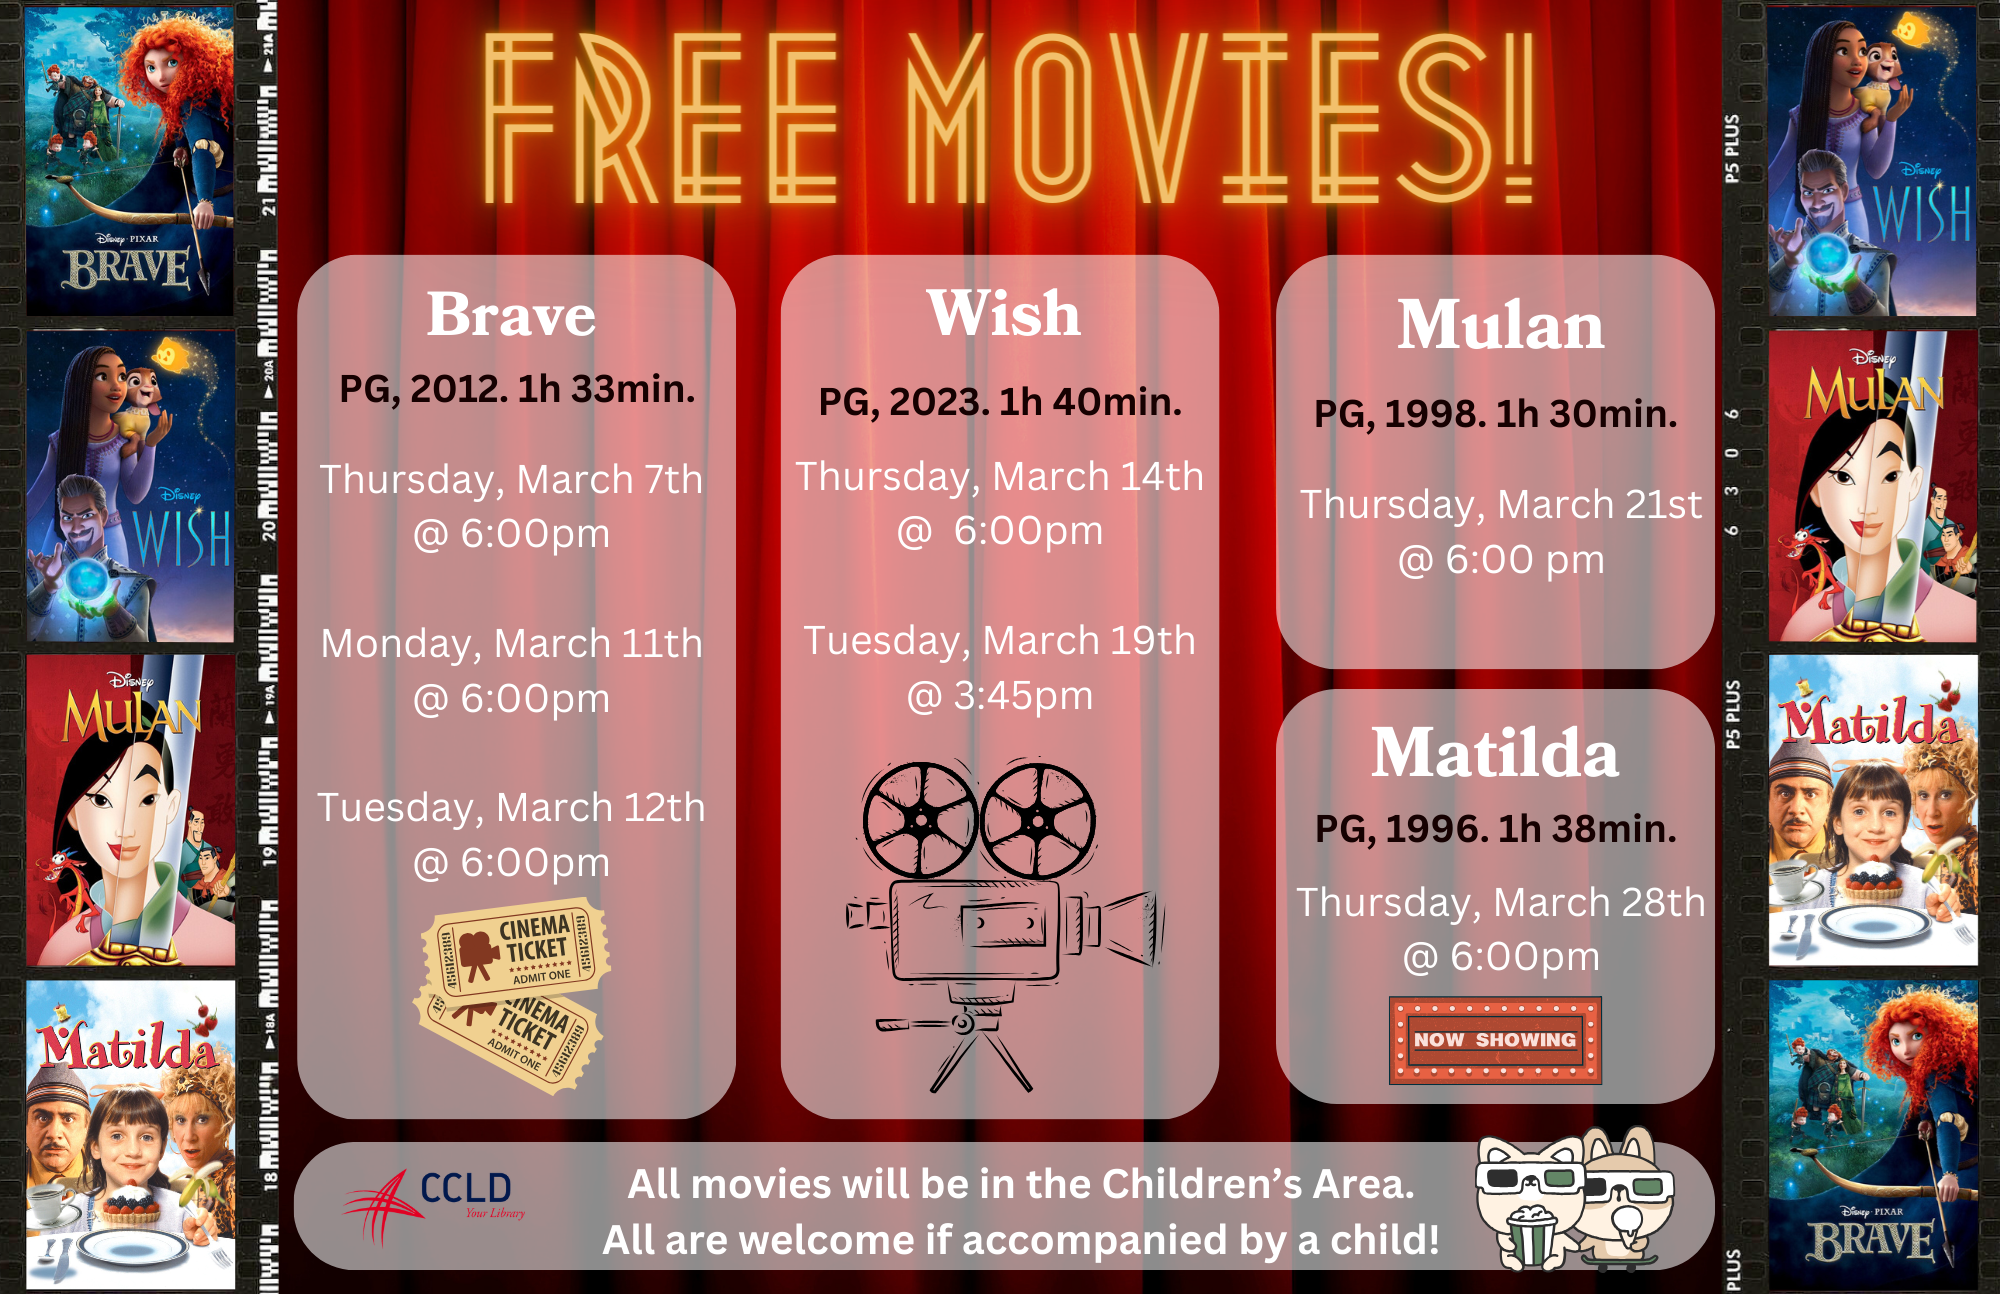 Join us to watch "Matilda"! 
Rated PG, 1996.
Snacks and water provided. All are welcome if accompanied by a child!